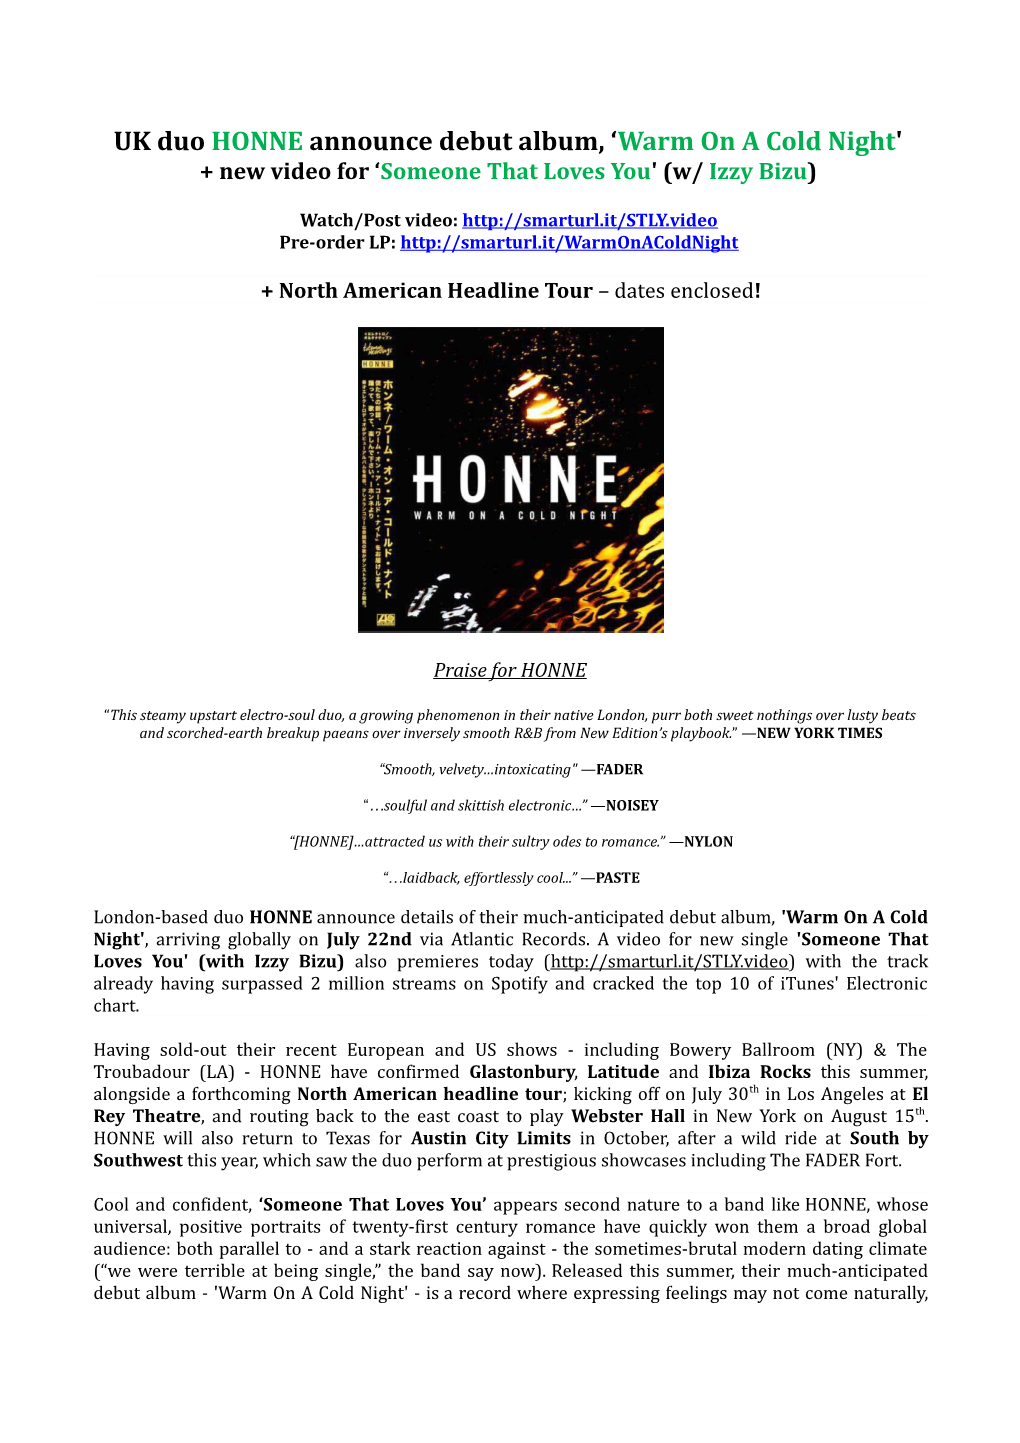 UK Duo HONNE Announce Debut Album, Warm on a Cold Night'